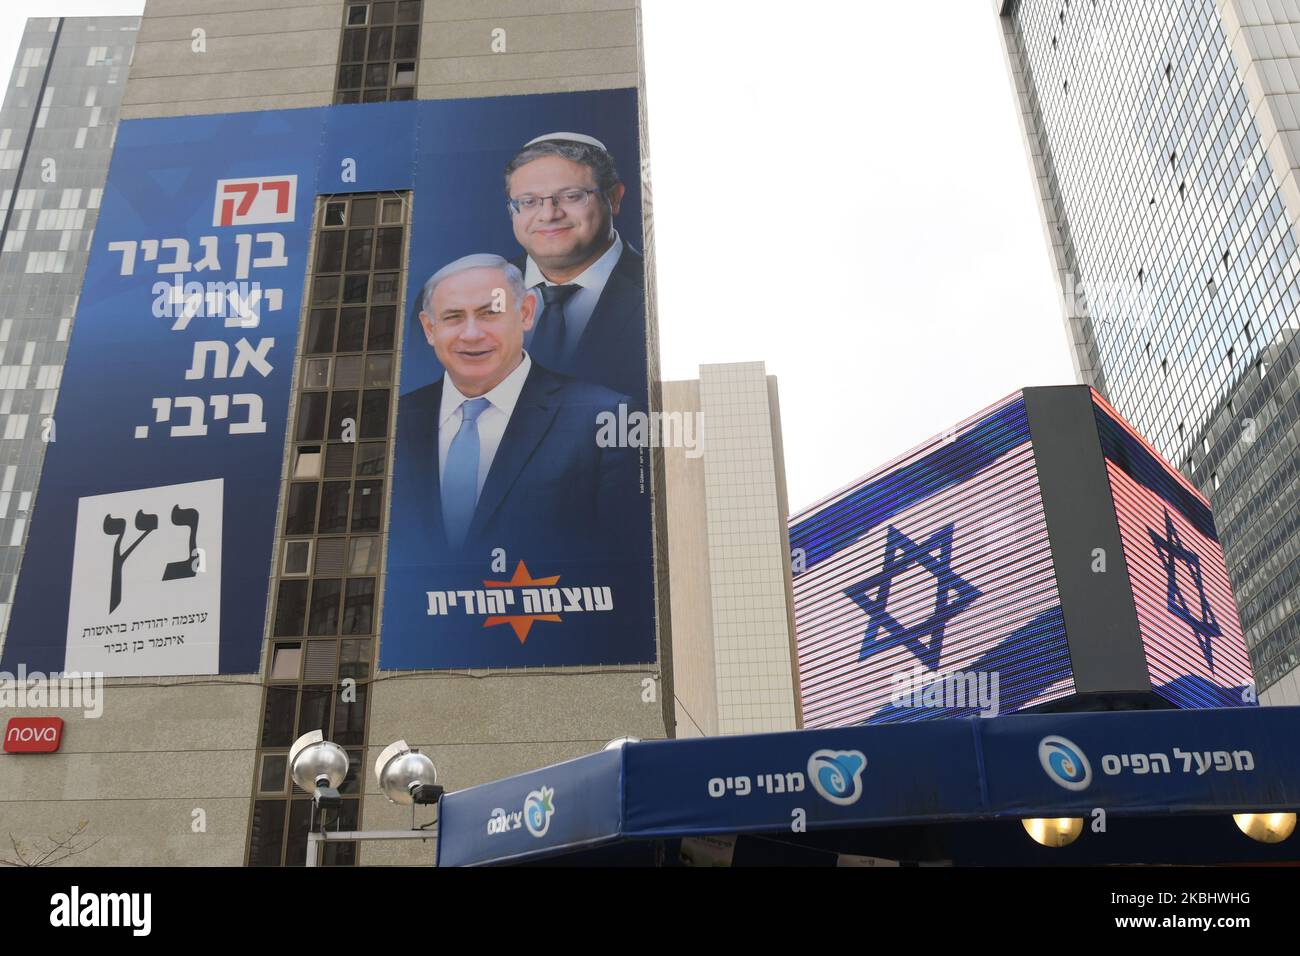 An election campaign poster for far-right Otzma Yehudit (Jewish Power) with images of party leader Itamar Ben-Gvir behind Benjamin Netanyahu, Israeli PM and Likud Party leader. Israelis head to the polls for the third election in less than a year on March 2nd. On Tuesday, February 25, 2020, in Ramat Gan, Tel Aviv District, Israel. (Photo by Artur Widak/NurPhoto) Stock Photo